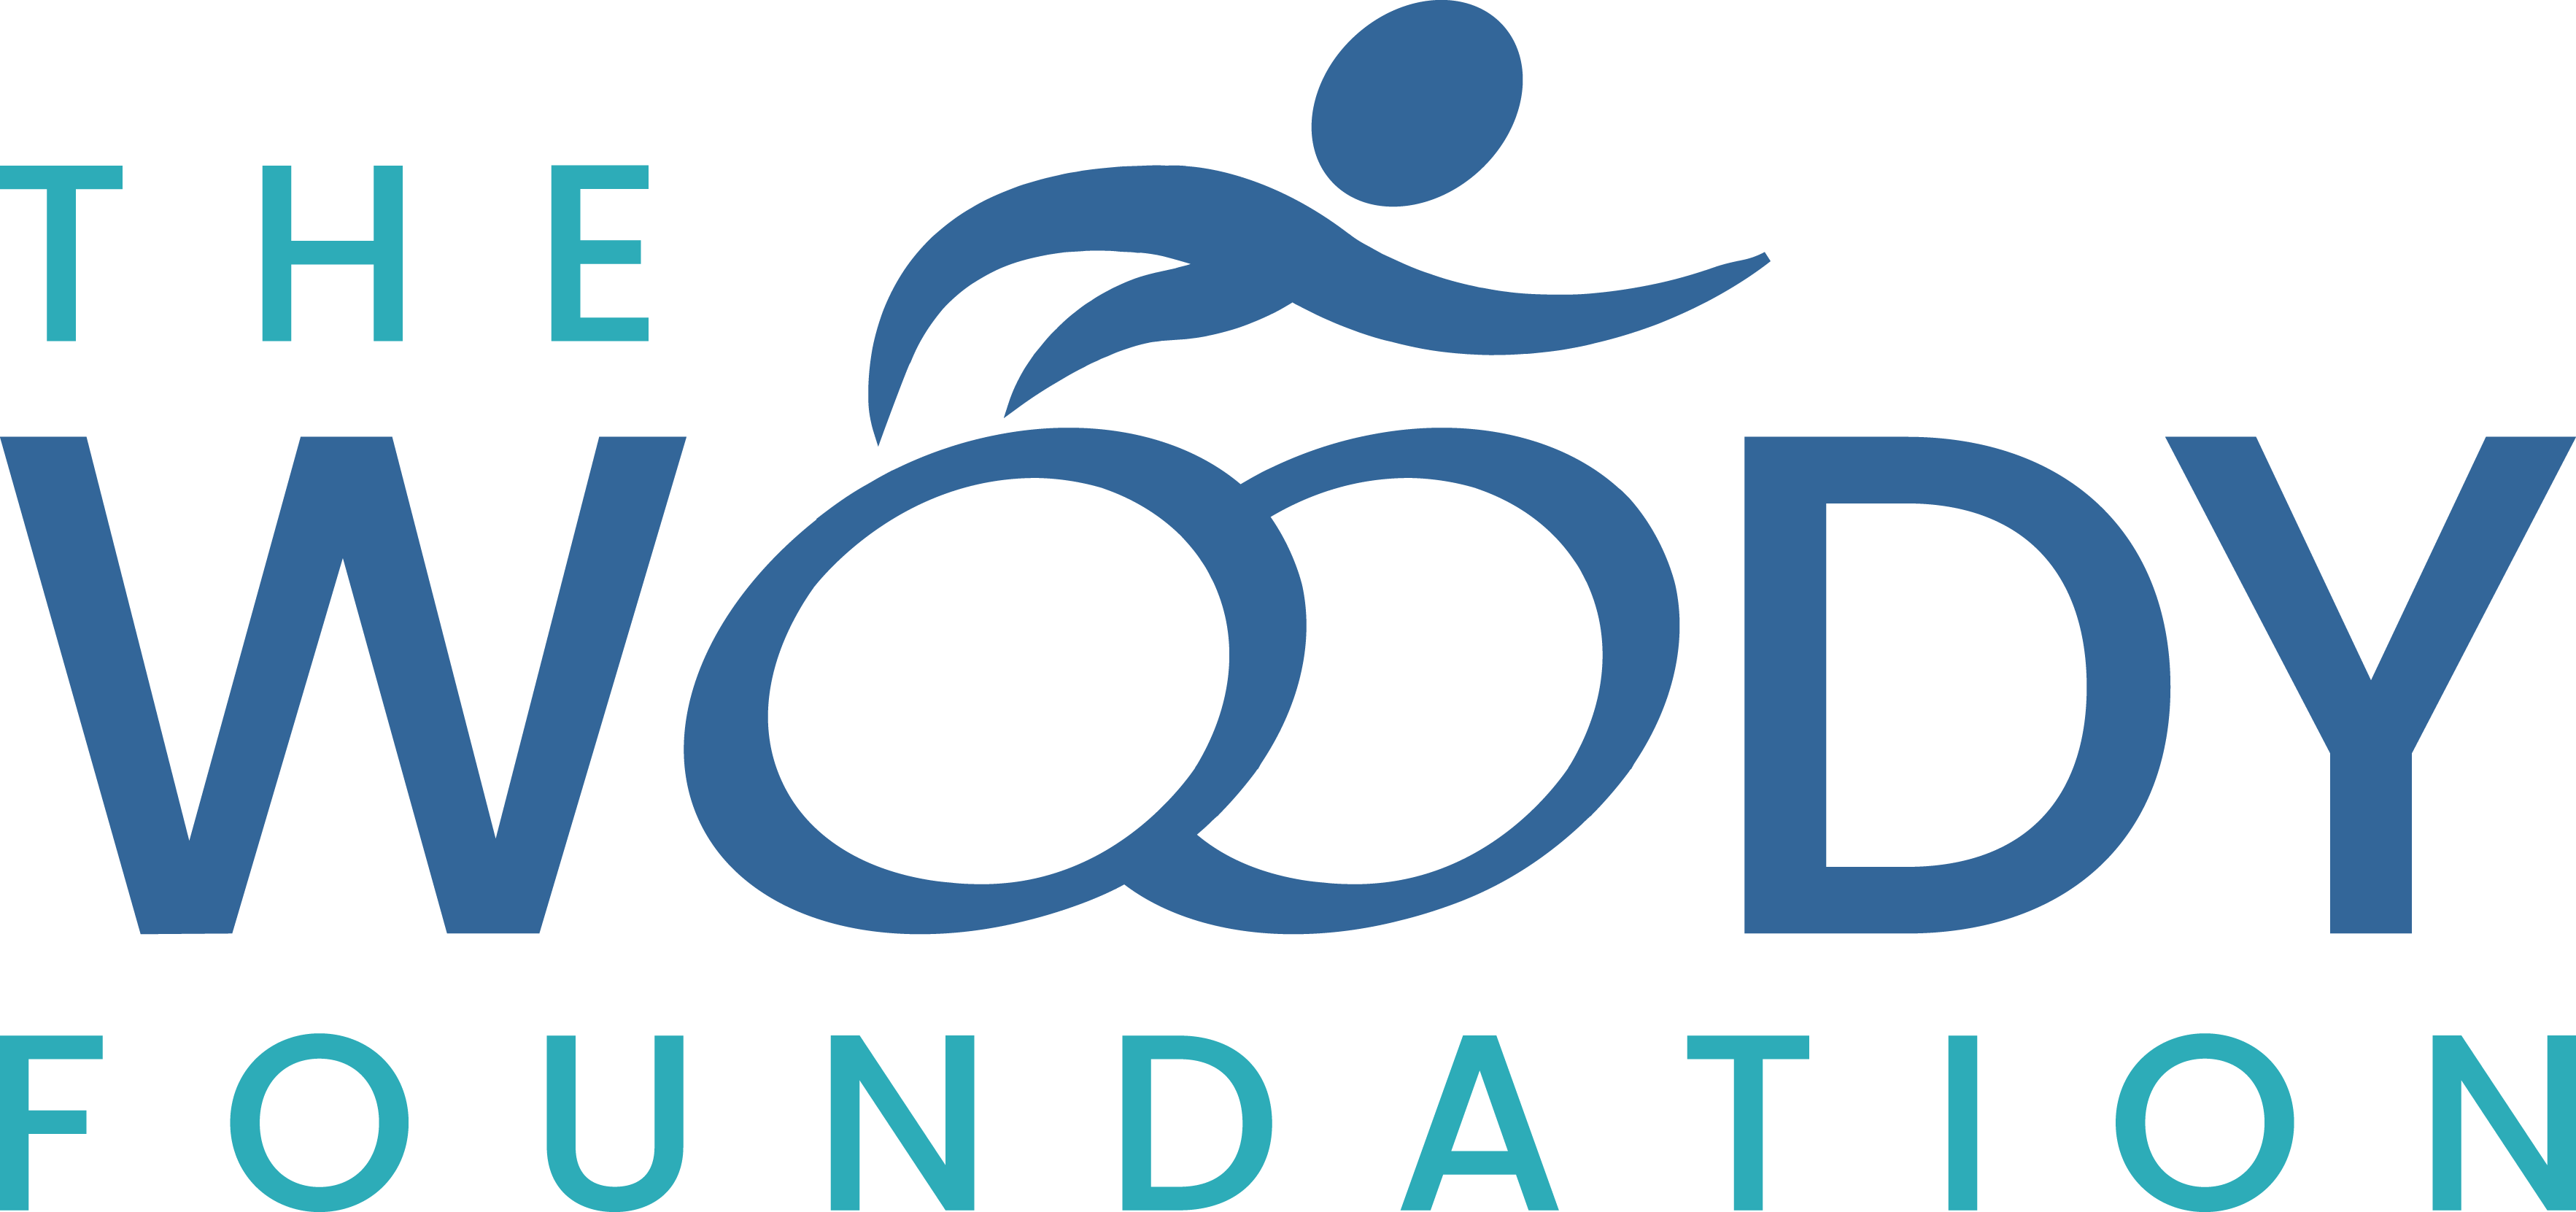 The Woody Foundation